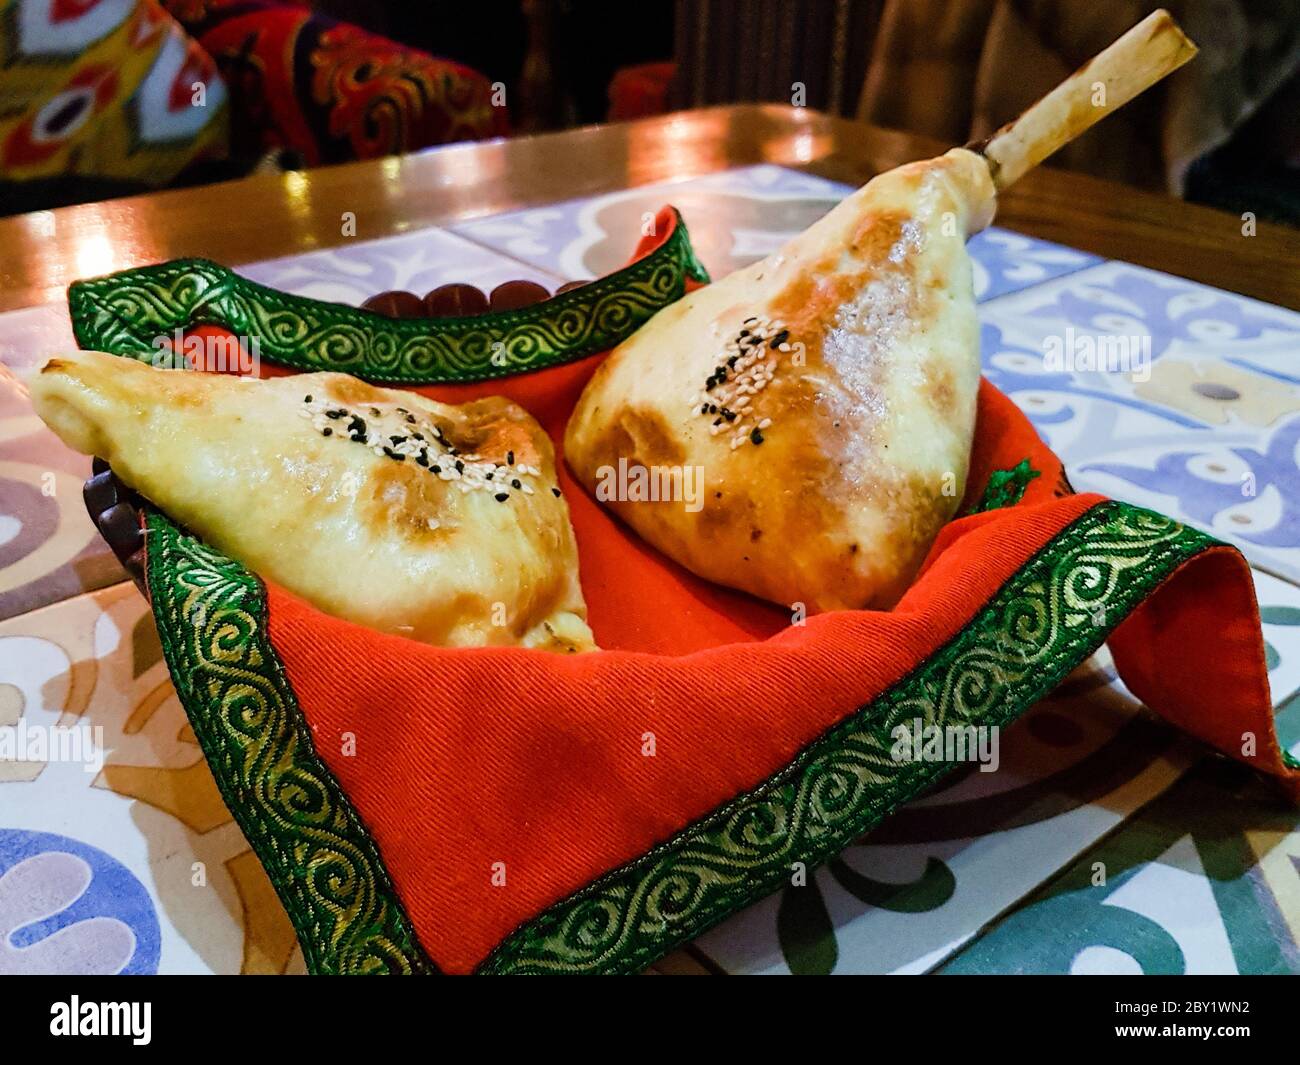 Close up photo of samsa, a popular Central Asian dish commonly attributed to Kyrgyz cuisine. Stock Photo